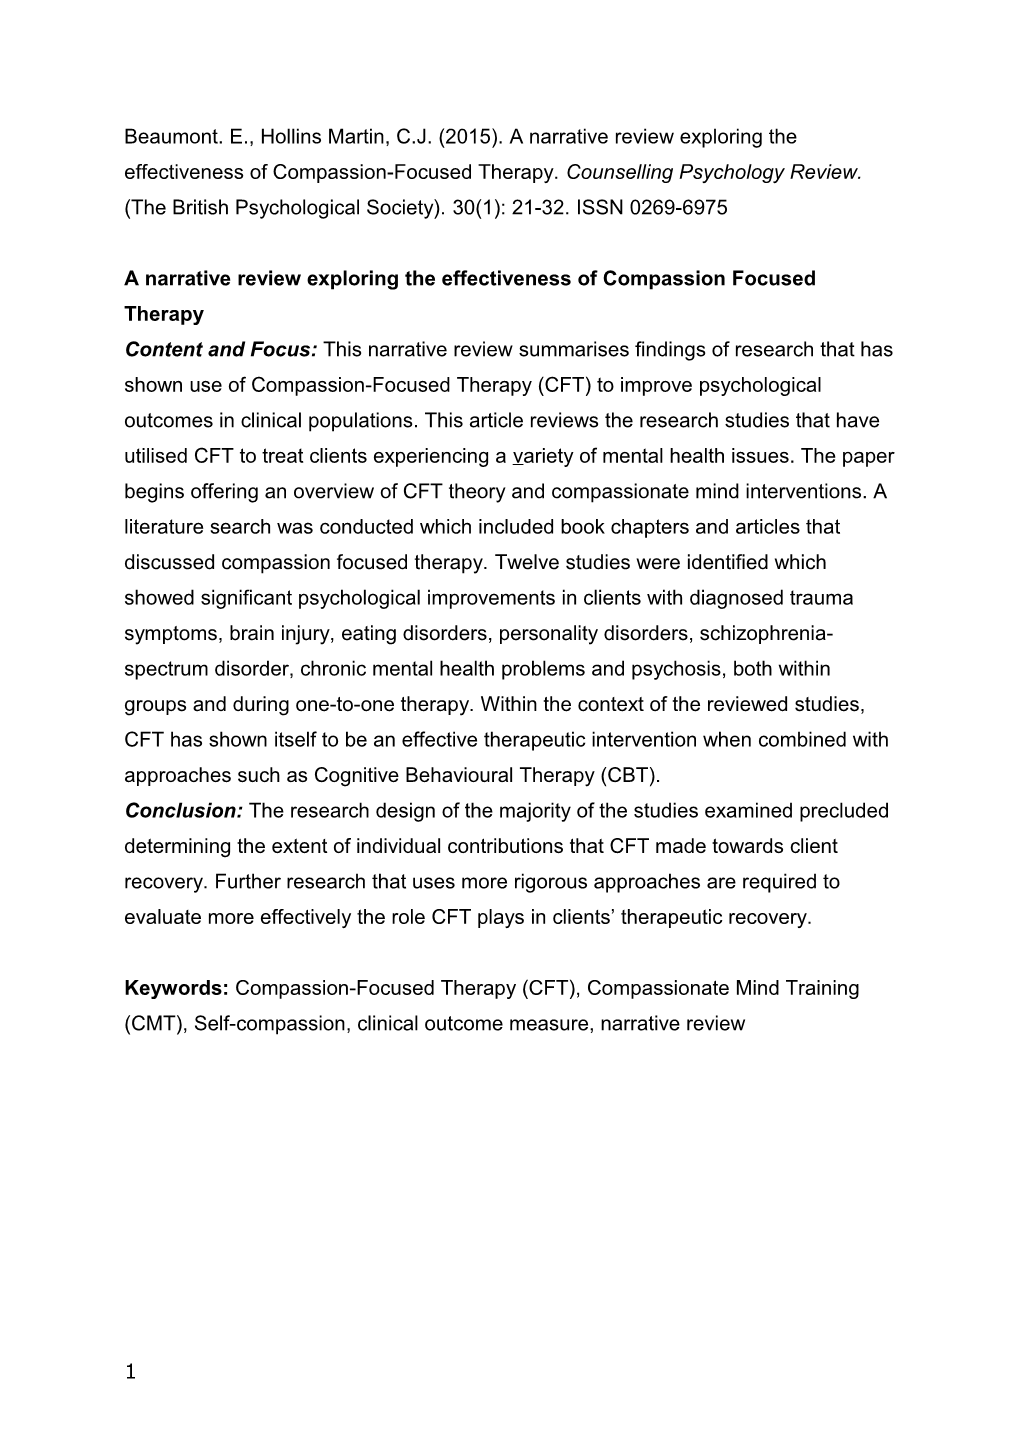 A Narrative Review Exploring the Effectiveness of Compassionfocused Therapy